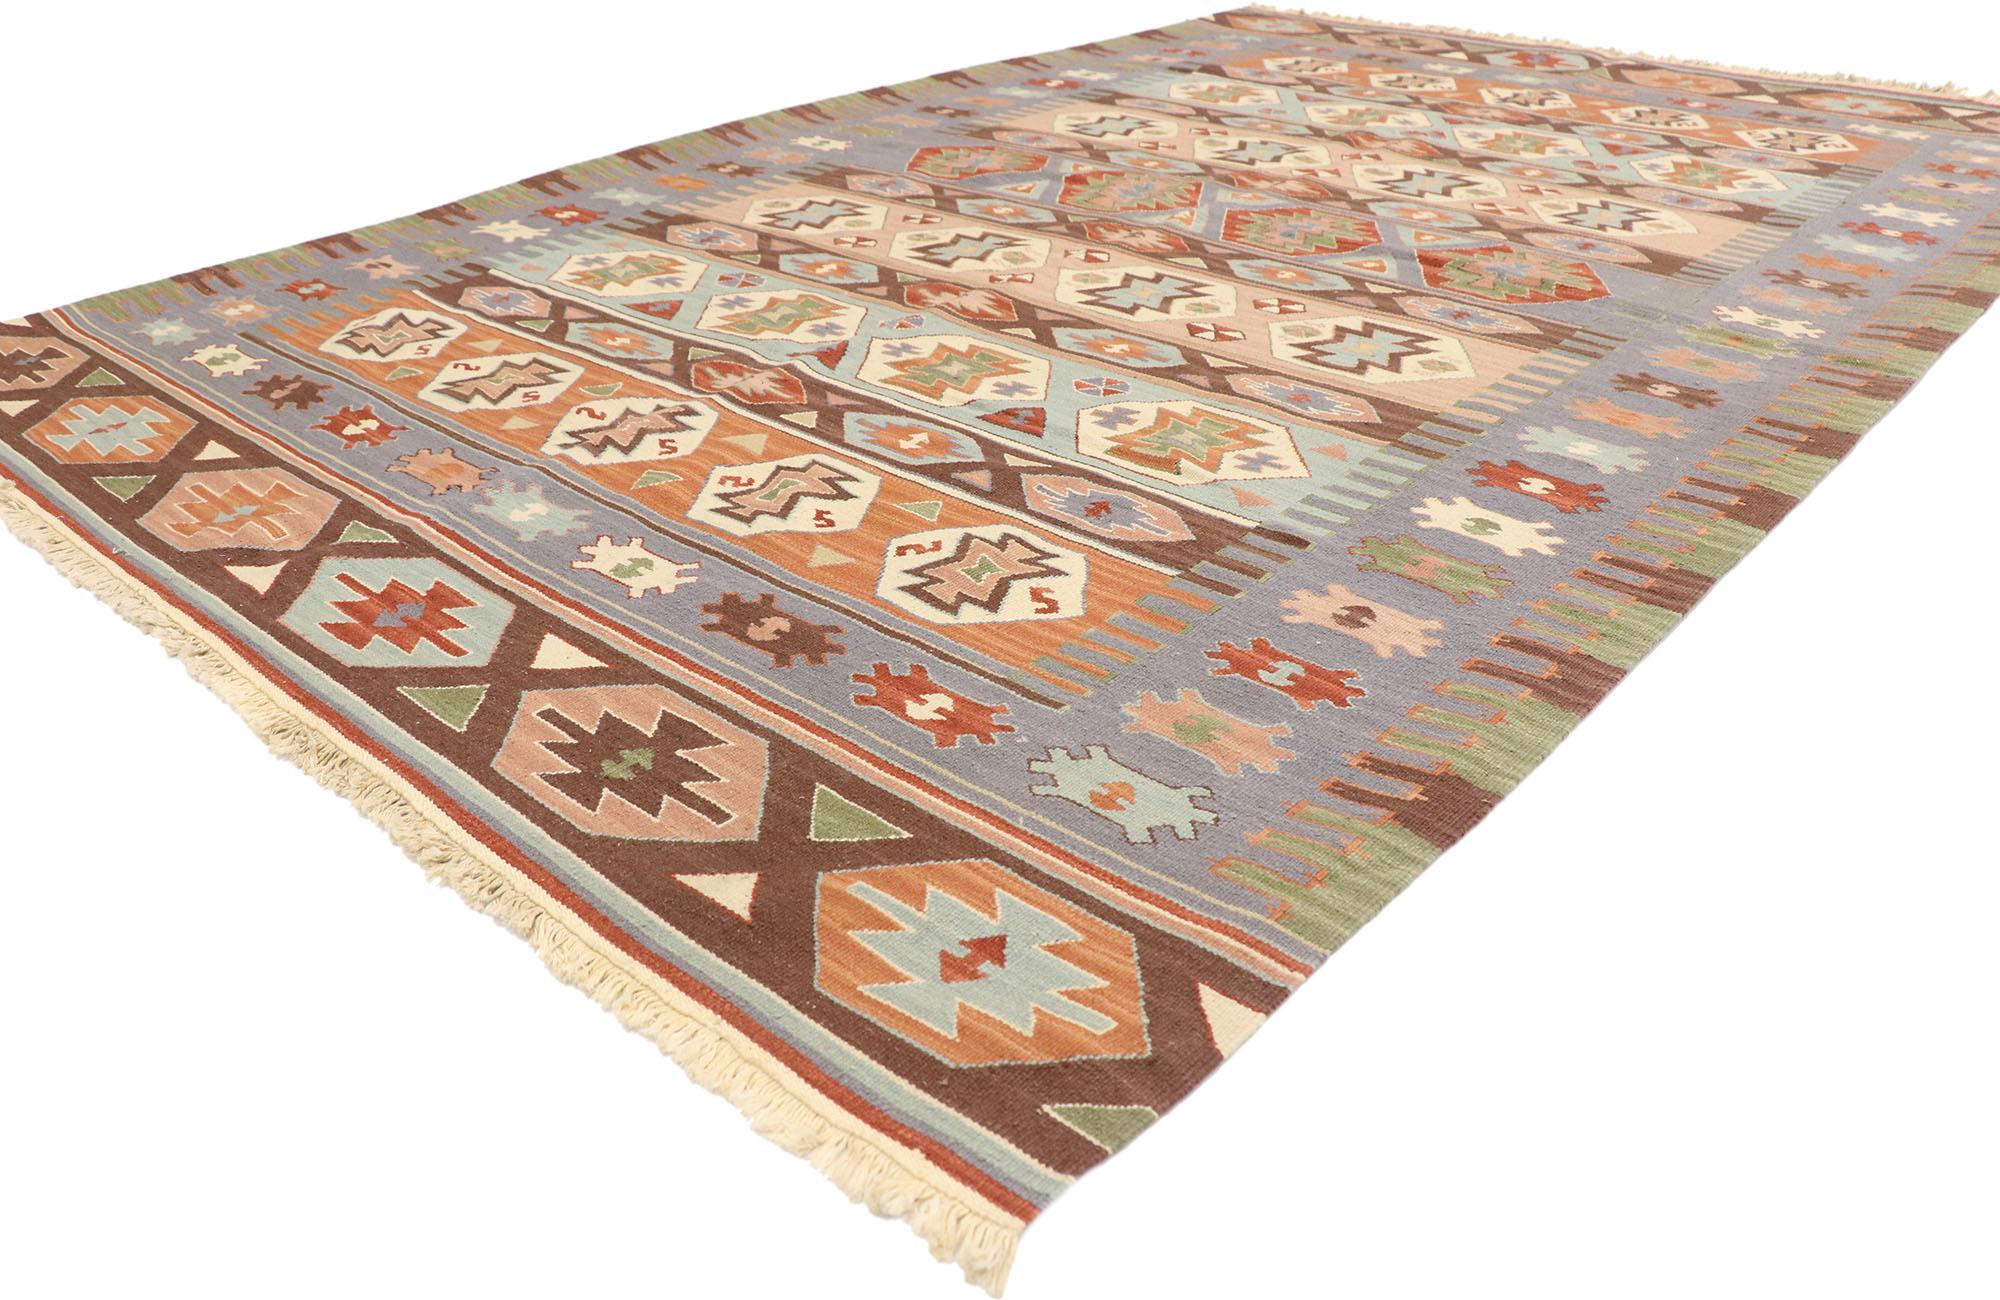 77931 Vintage Persian Shiraz Kilim rug with Bohemian tribal style 05'07 x 08'07. Full of tiny details and a bold expressive design combined with contrasting colors and tribal style, this hand-woven wool vintage Persian Shiraz Kilim rug is a